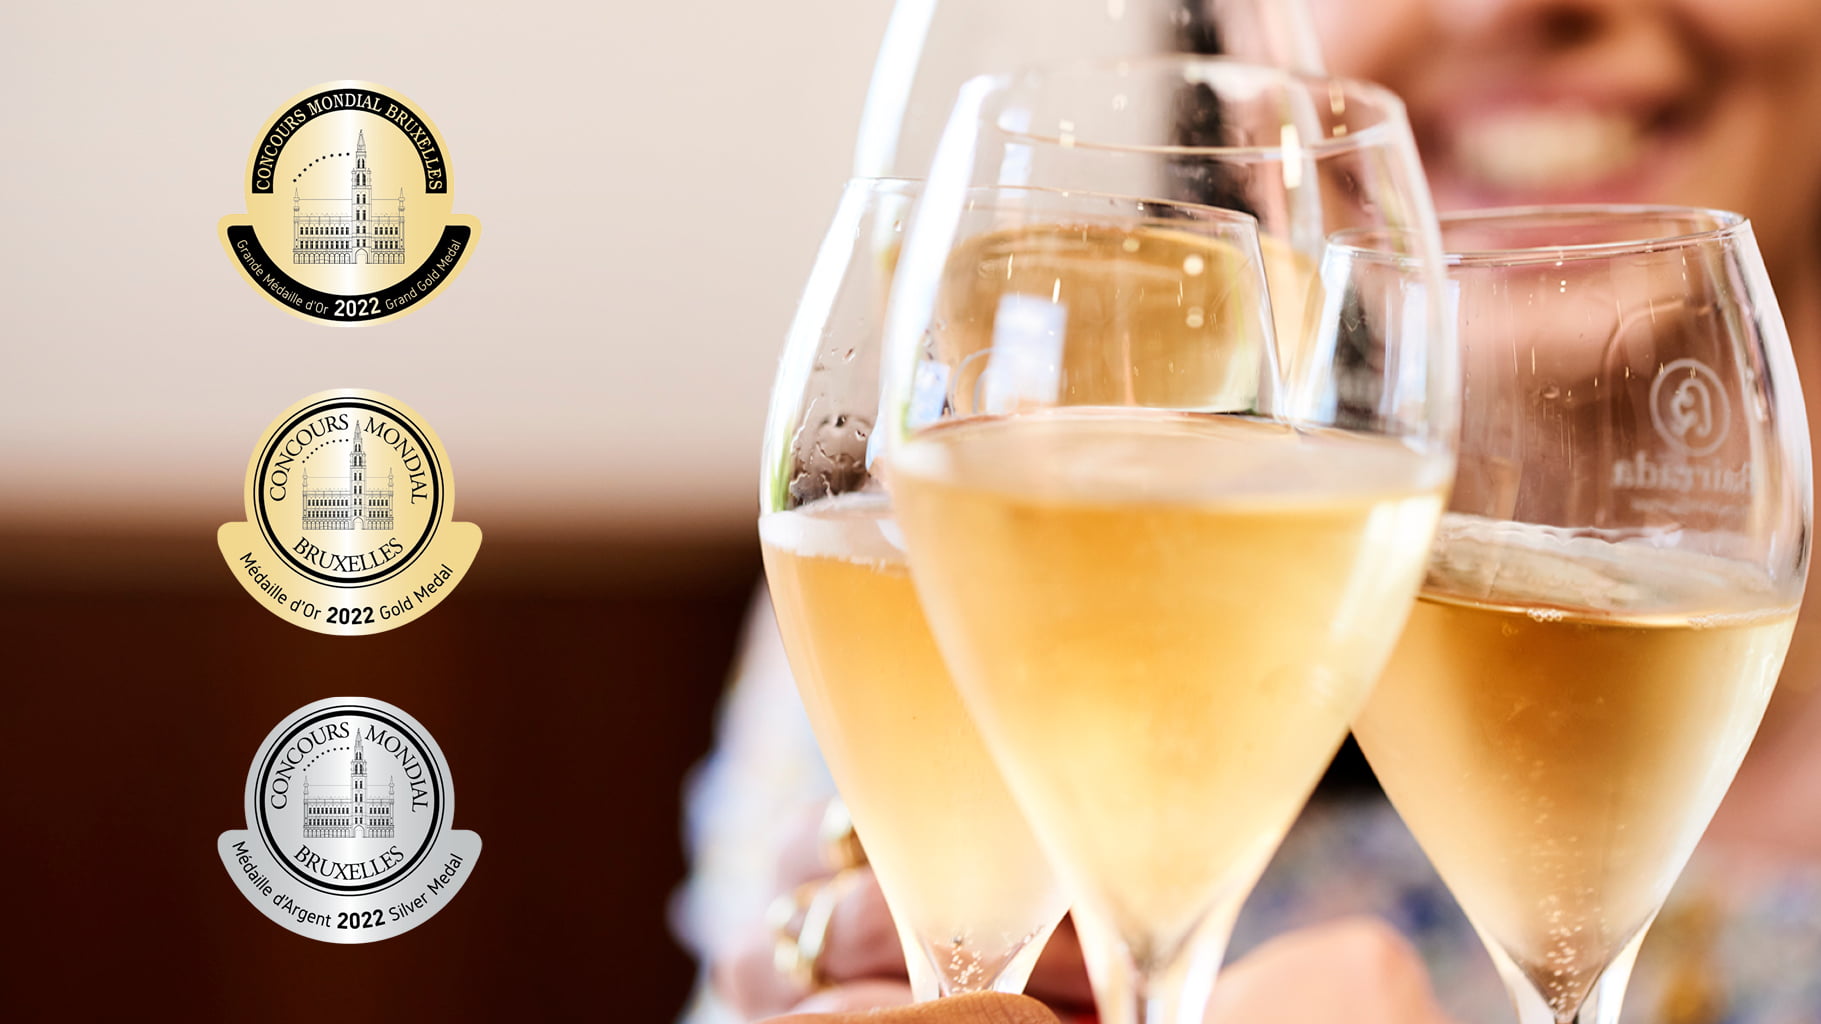 The Concours Mondial de Bruxelles unveils the finest sparkling wines of the year